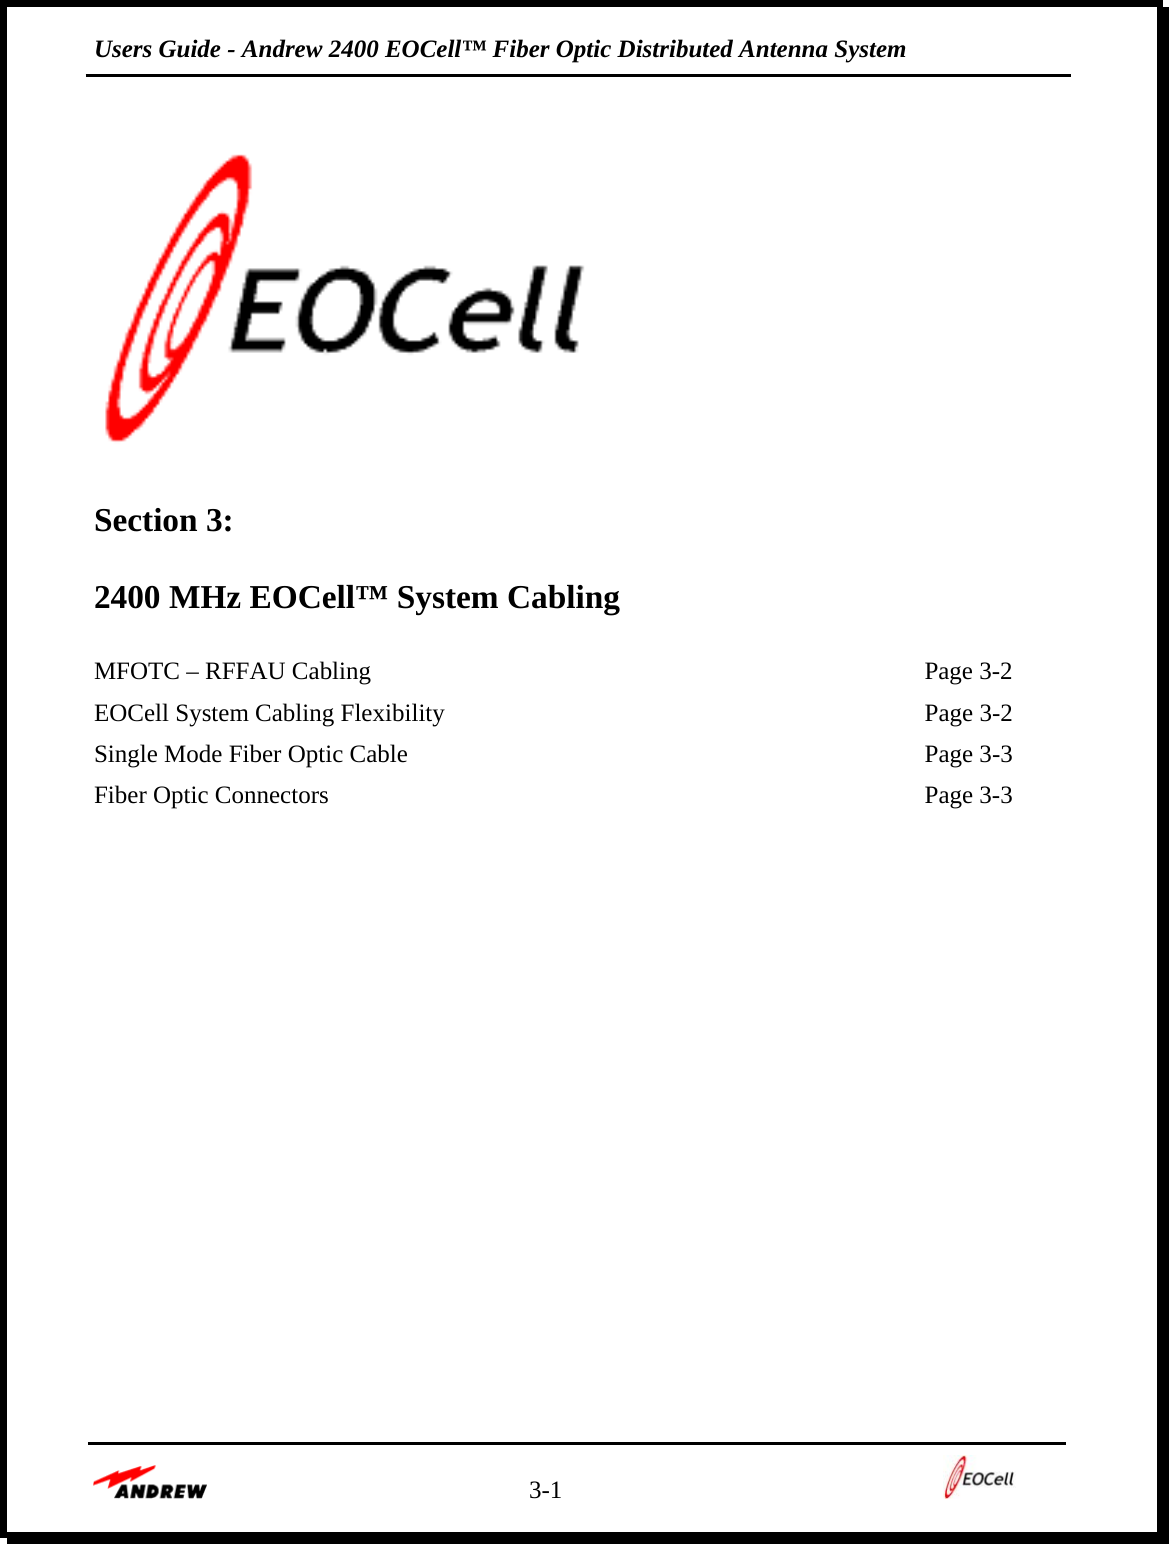 Users Guide - Andrew 2400 EOCell™ Fiber Optic Distributed Antenna System    3-1        Section 3:   2400 MHz EOCell™ System Cabling   MFOTC – RFFAU Cabling    Page 3-2 EOCell System Cabling Flexibility    Page 3-2 Single Mode Fiber Optic Cable    Page 3-3 Fiber Optic Connectors    Page 3-3         